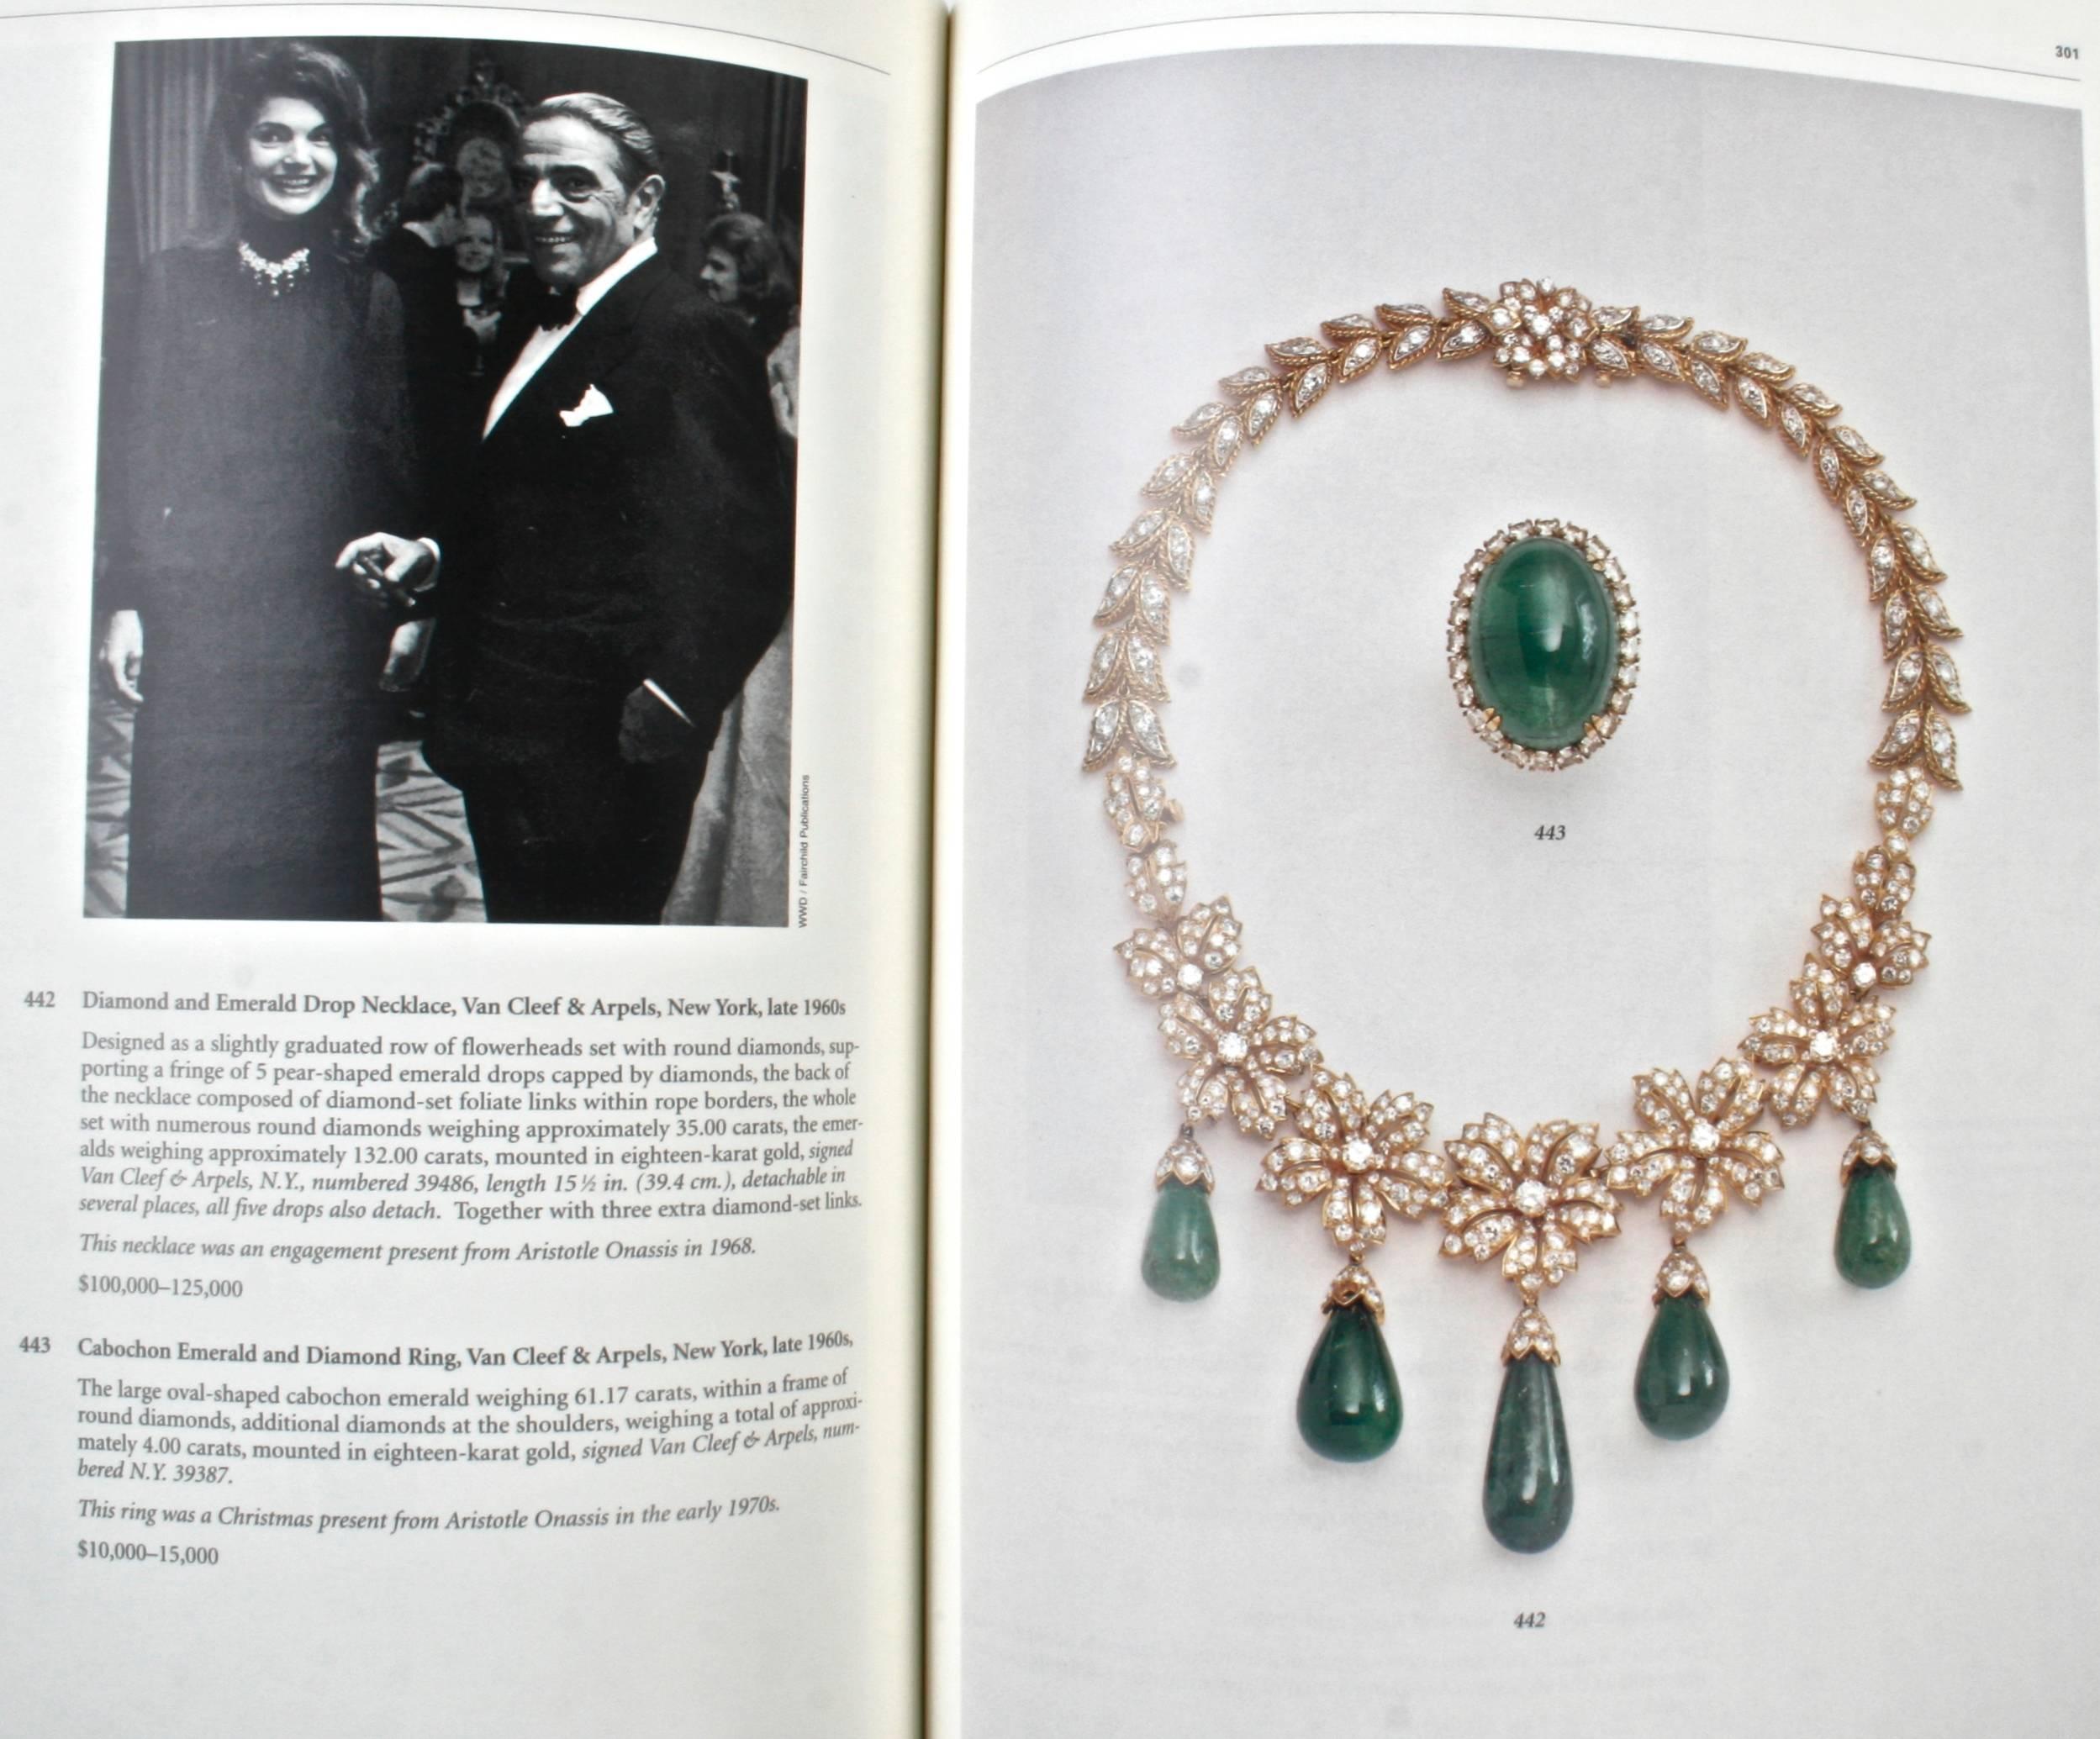 American Sotheby's Auction Catalogue for The Estate of Jacqueline Kennedy Onassis